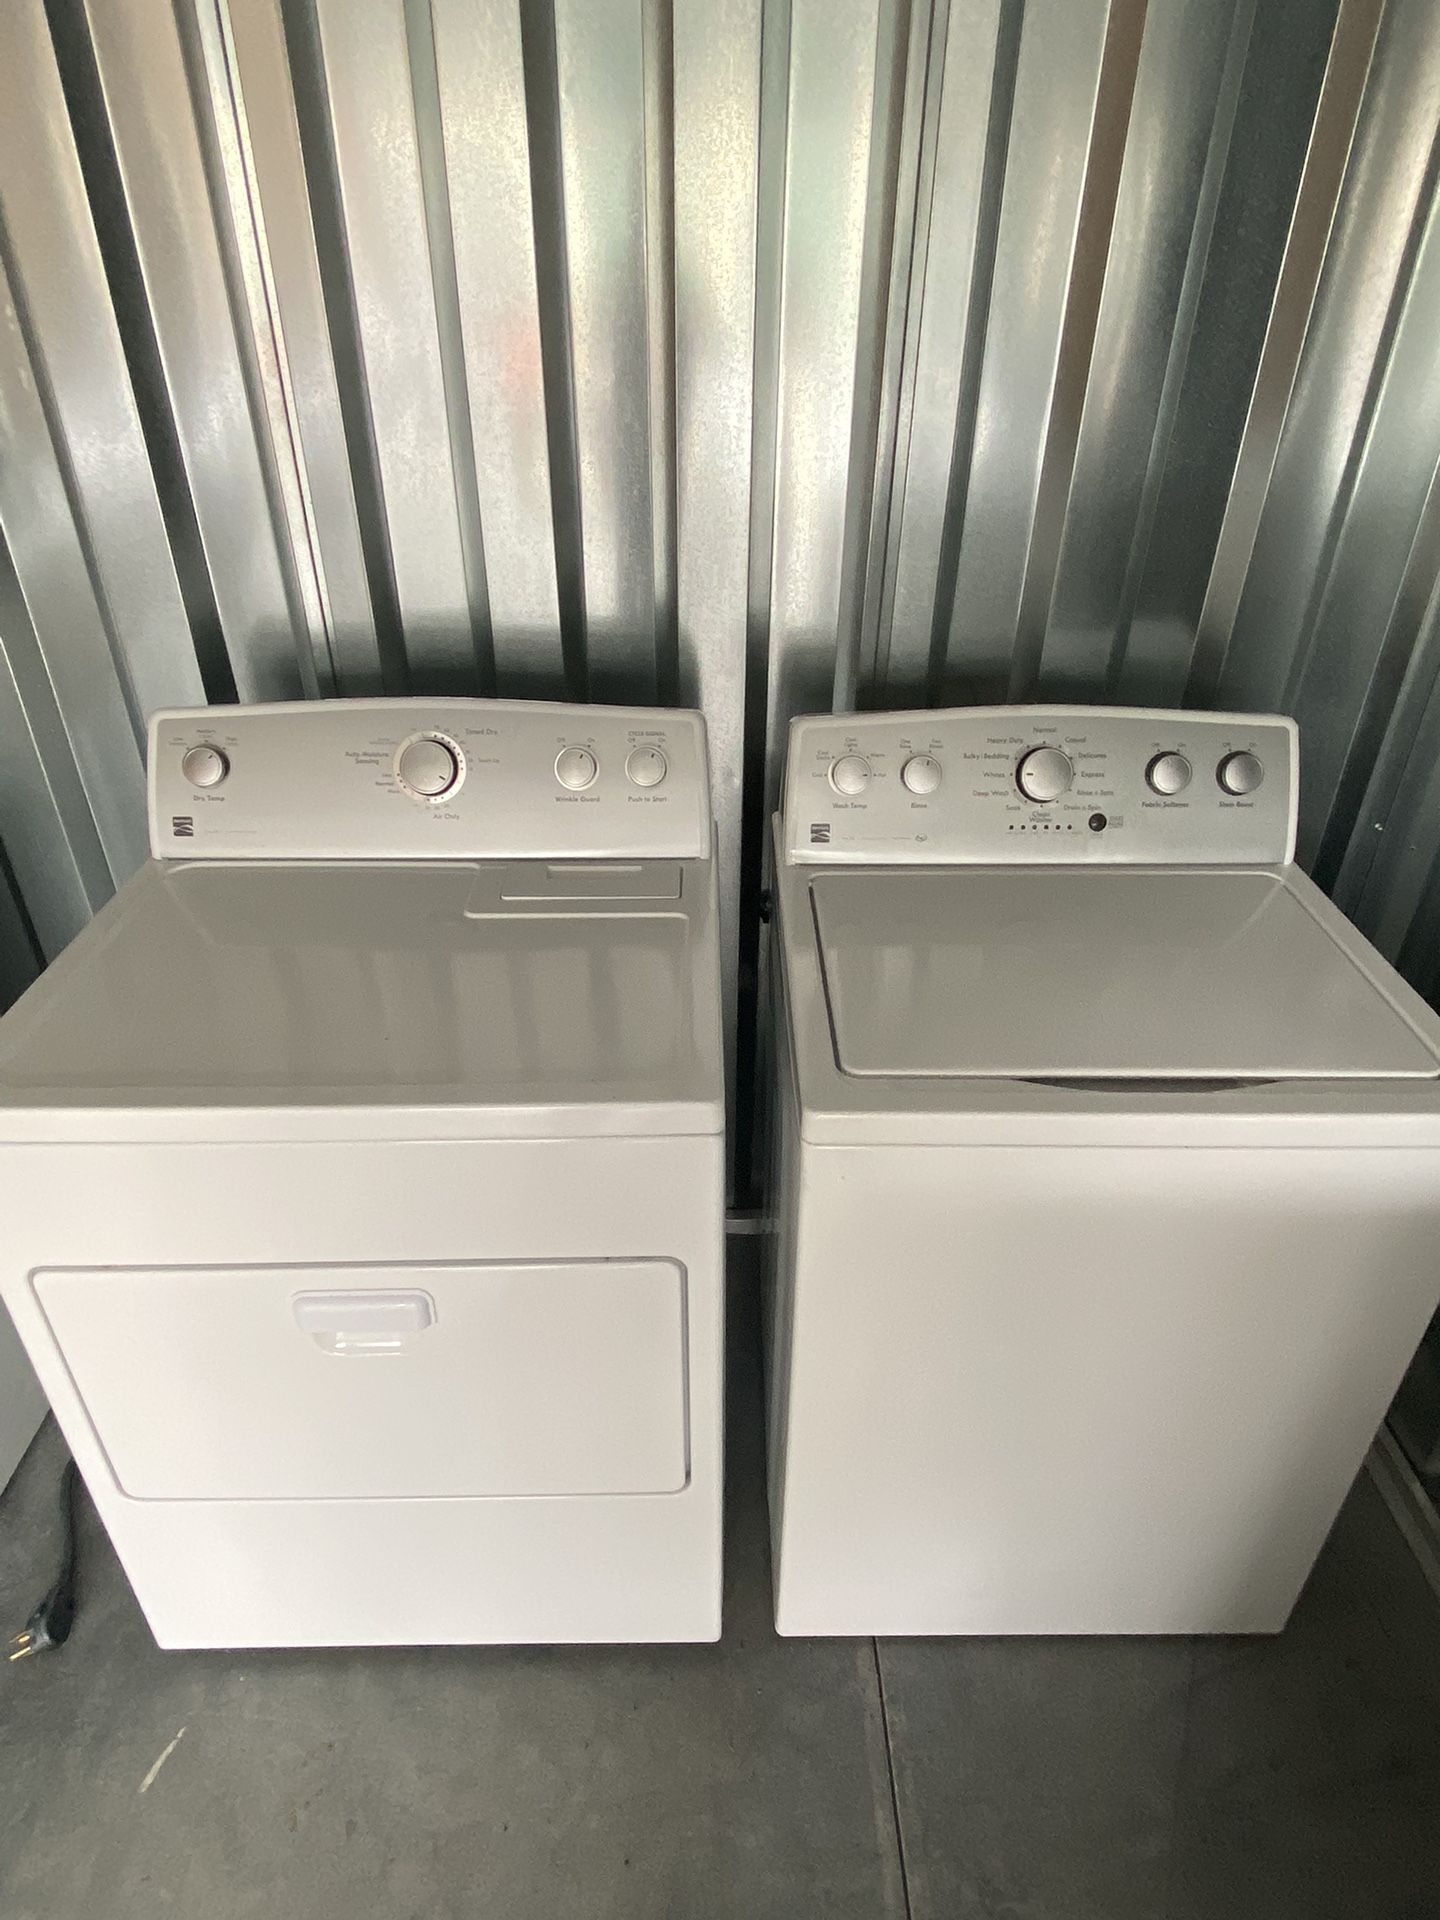 Clean Washer And Dryer 